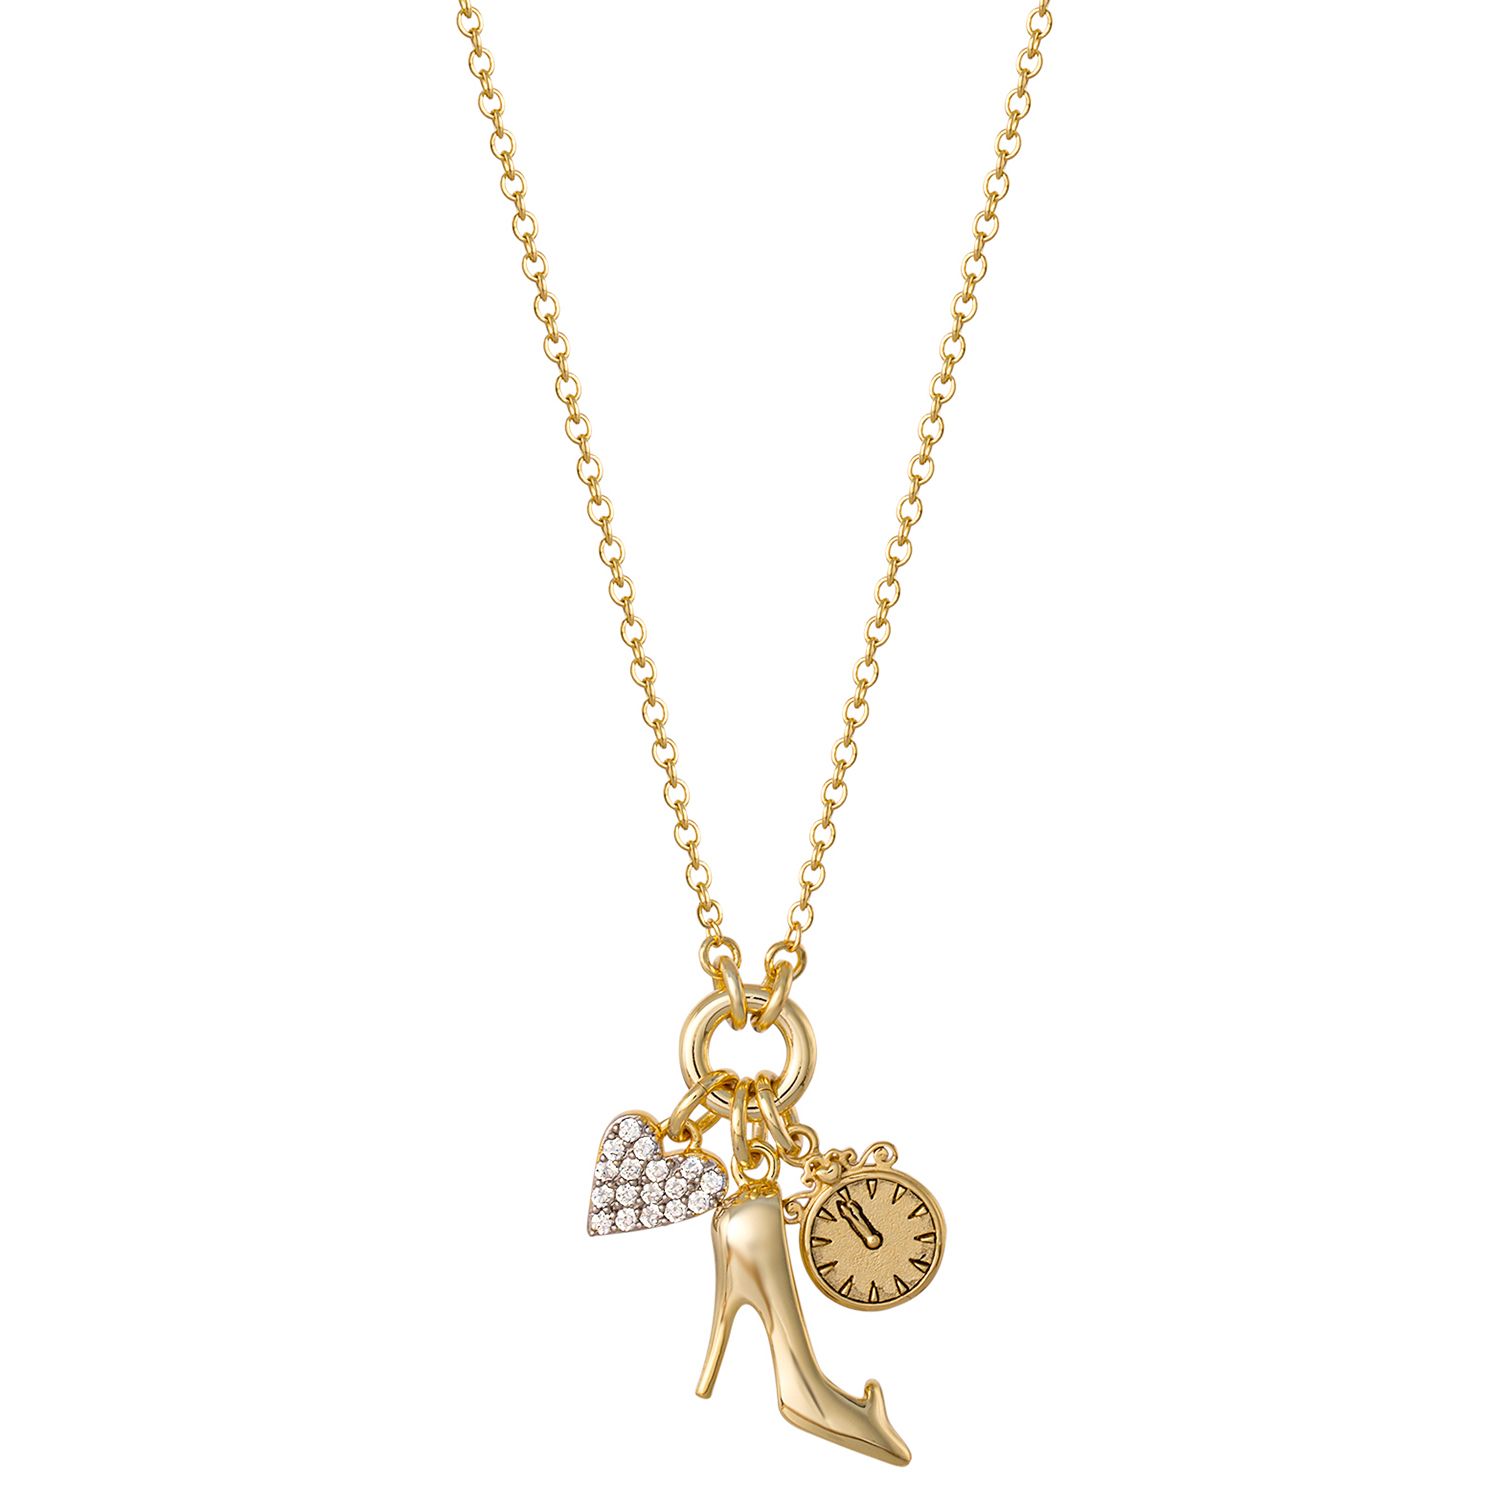 Image for Disney Princess Cinderella 18k Gold Plated Charm Necklace at Kohl's.